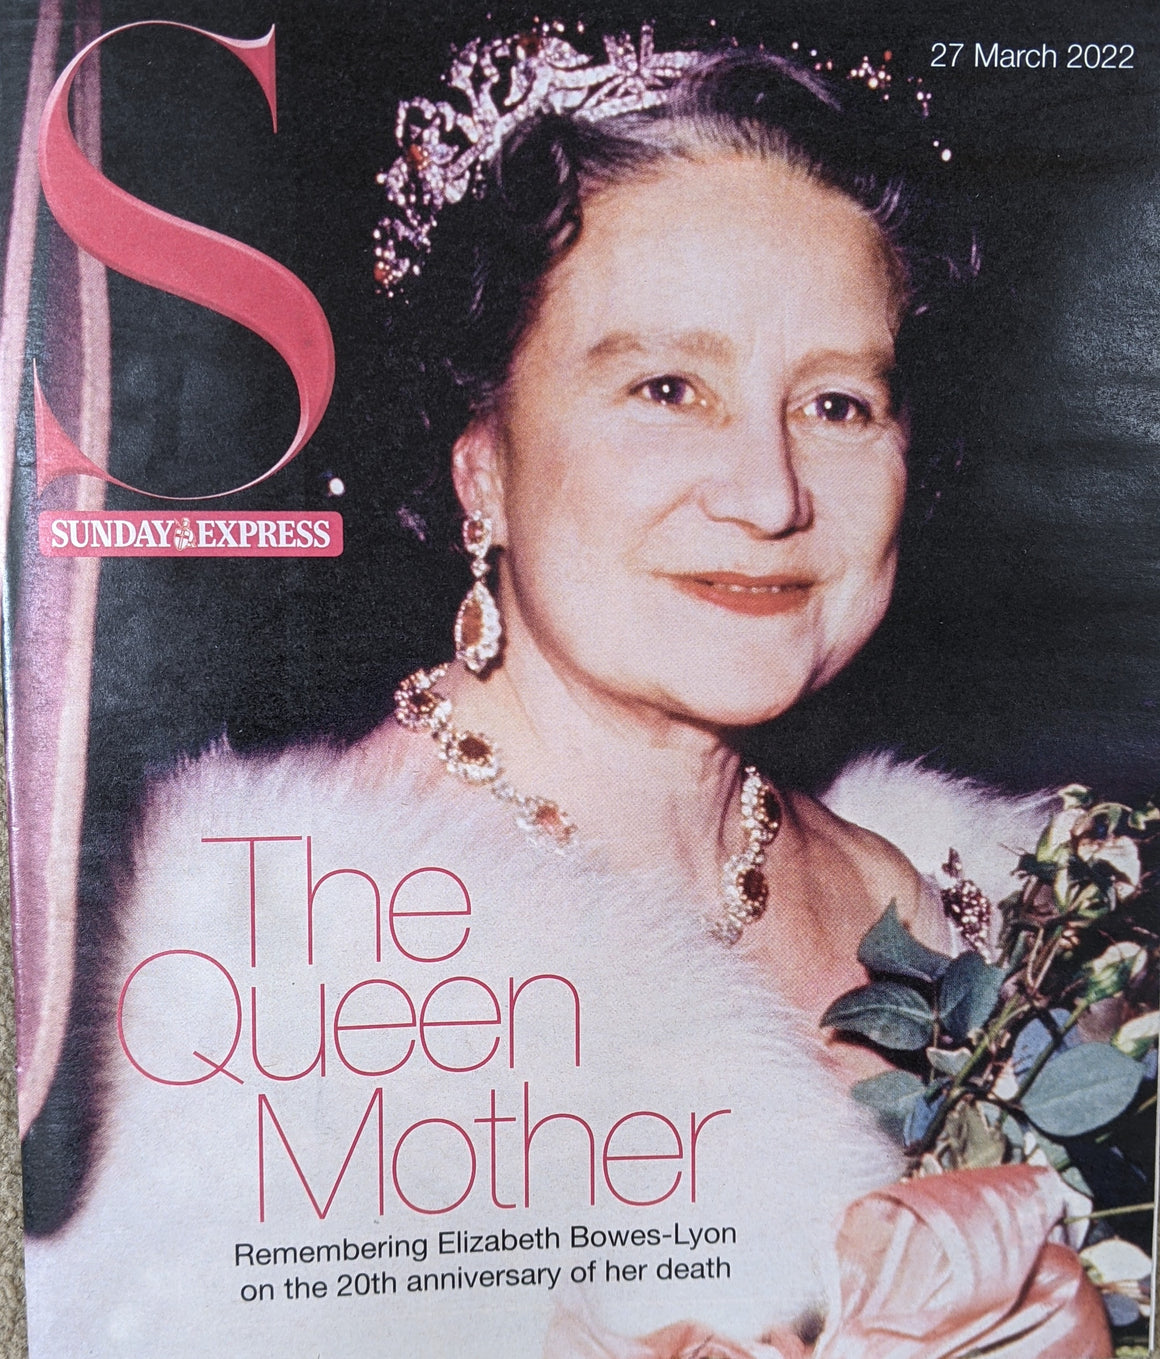 S EXPRESS UK MAGAZINE THE QUEEN ELIZABETH II MOTHER 20 YEARS SPECIAL - MARCH 2022